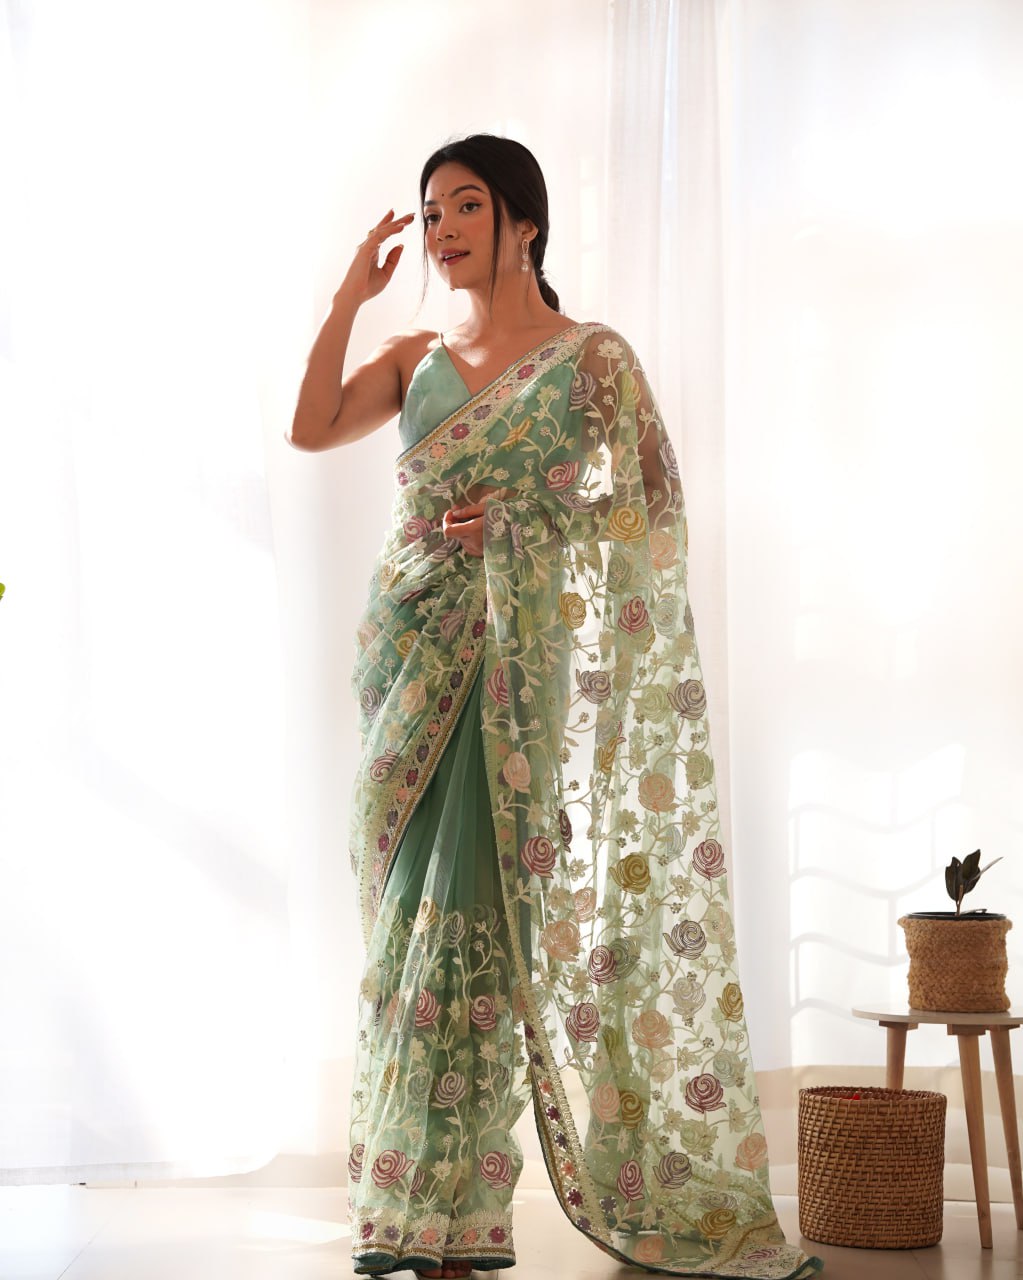 "Delicate as a Dream: Embrace the Ethereal Beauty of Butterfly Net Sarees"